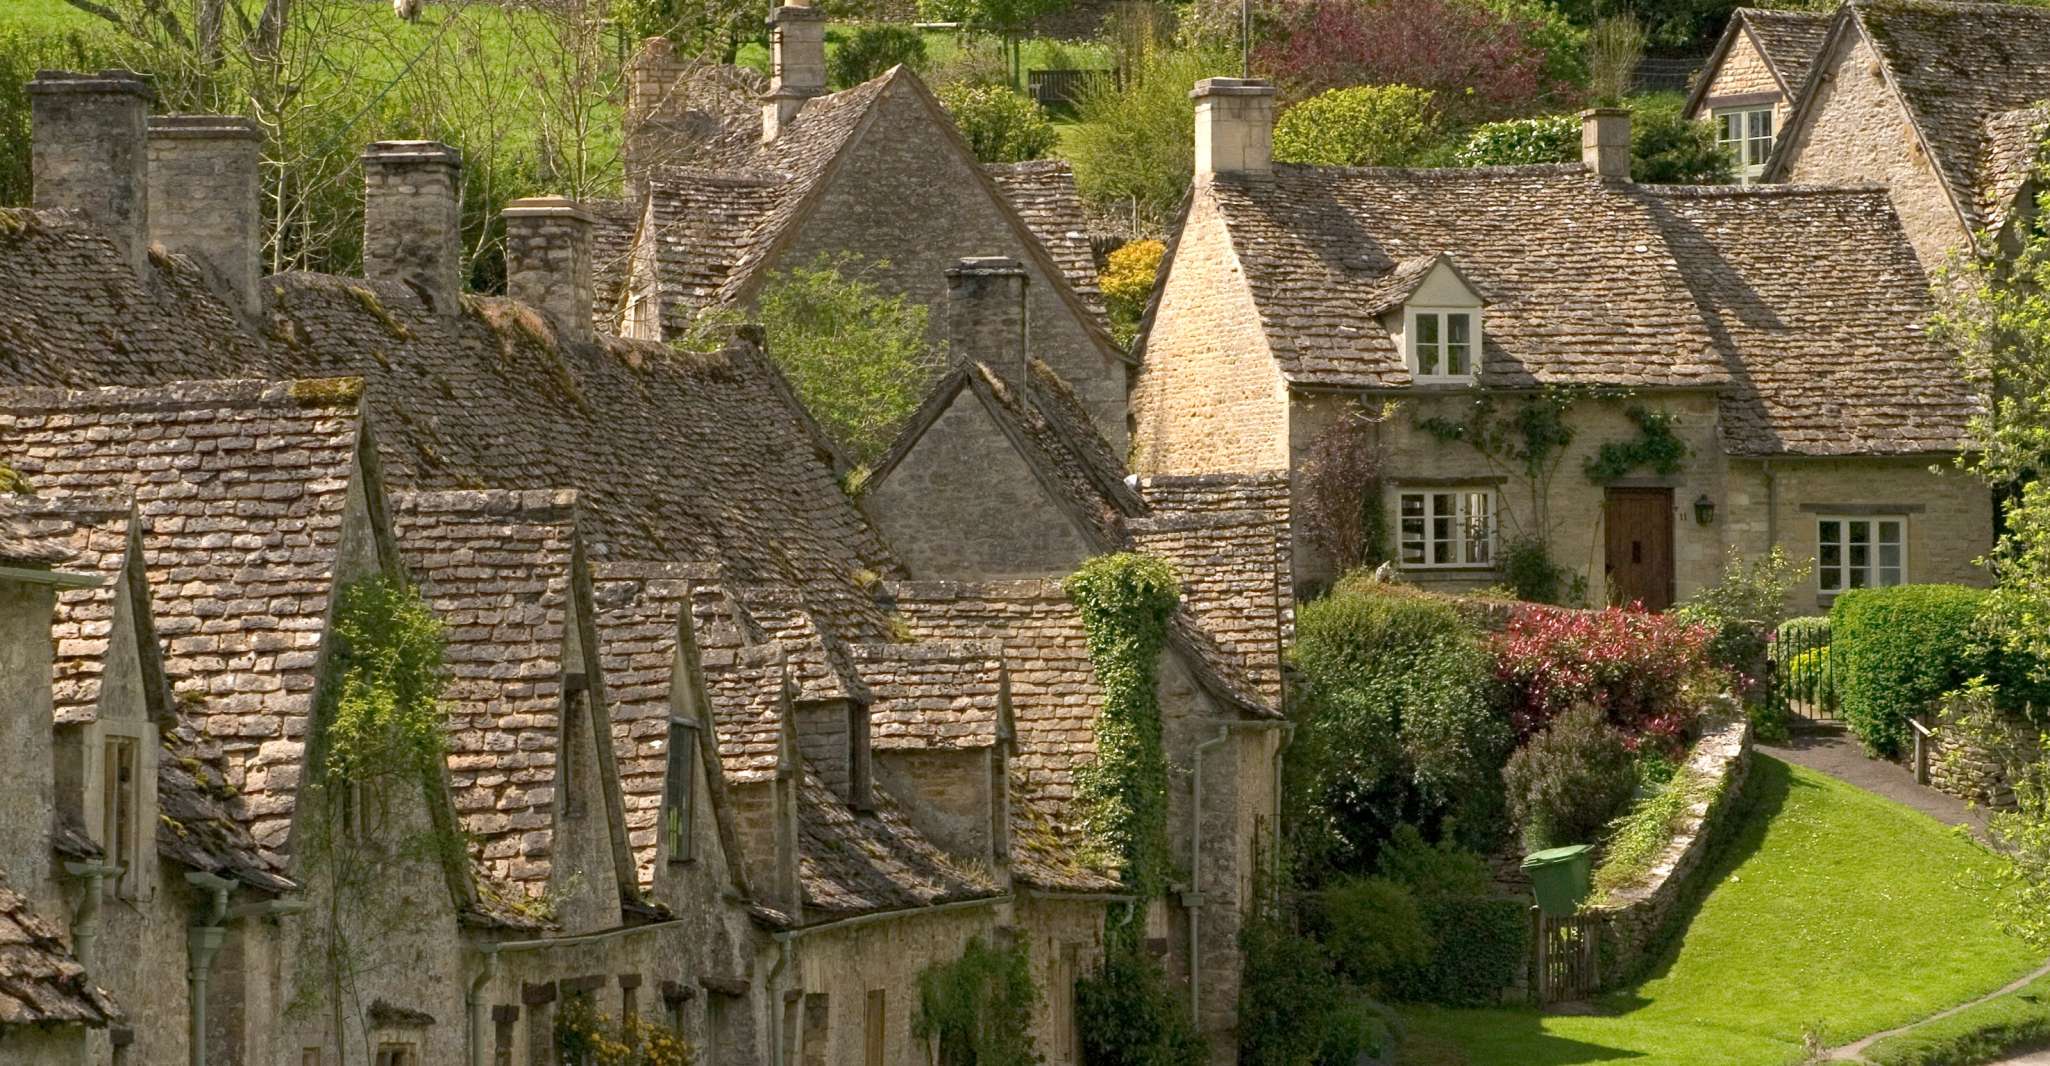 From London, Full-Day Cotswolds Small-Group Tour - Housity